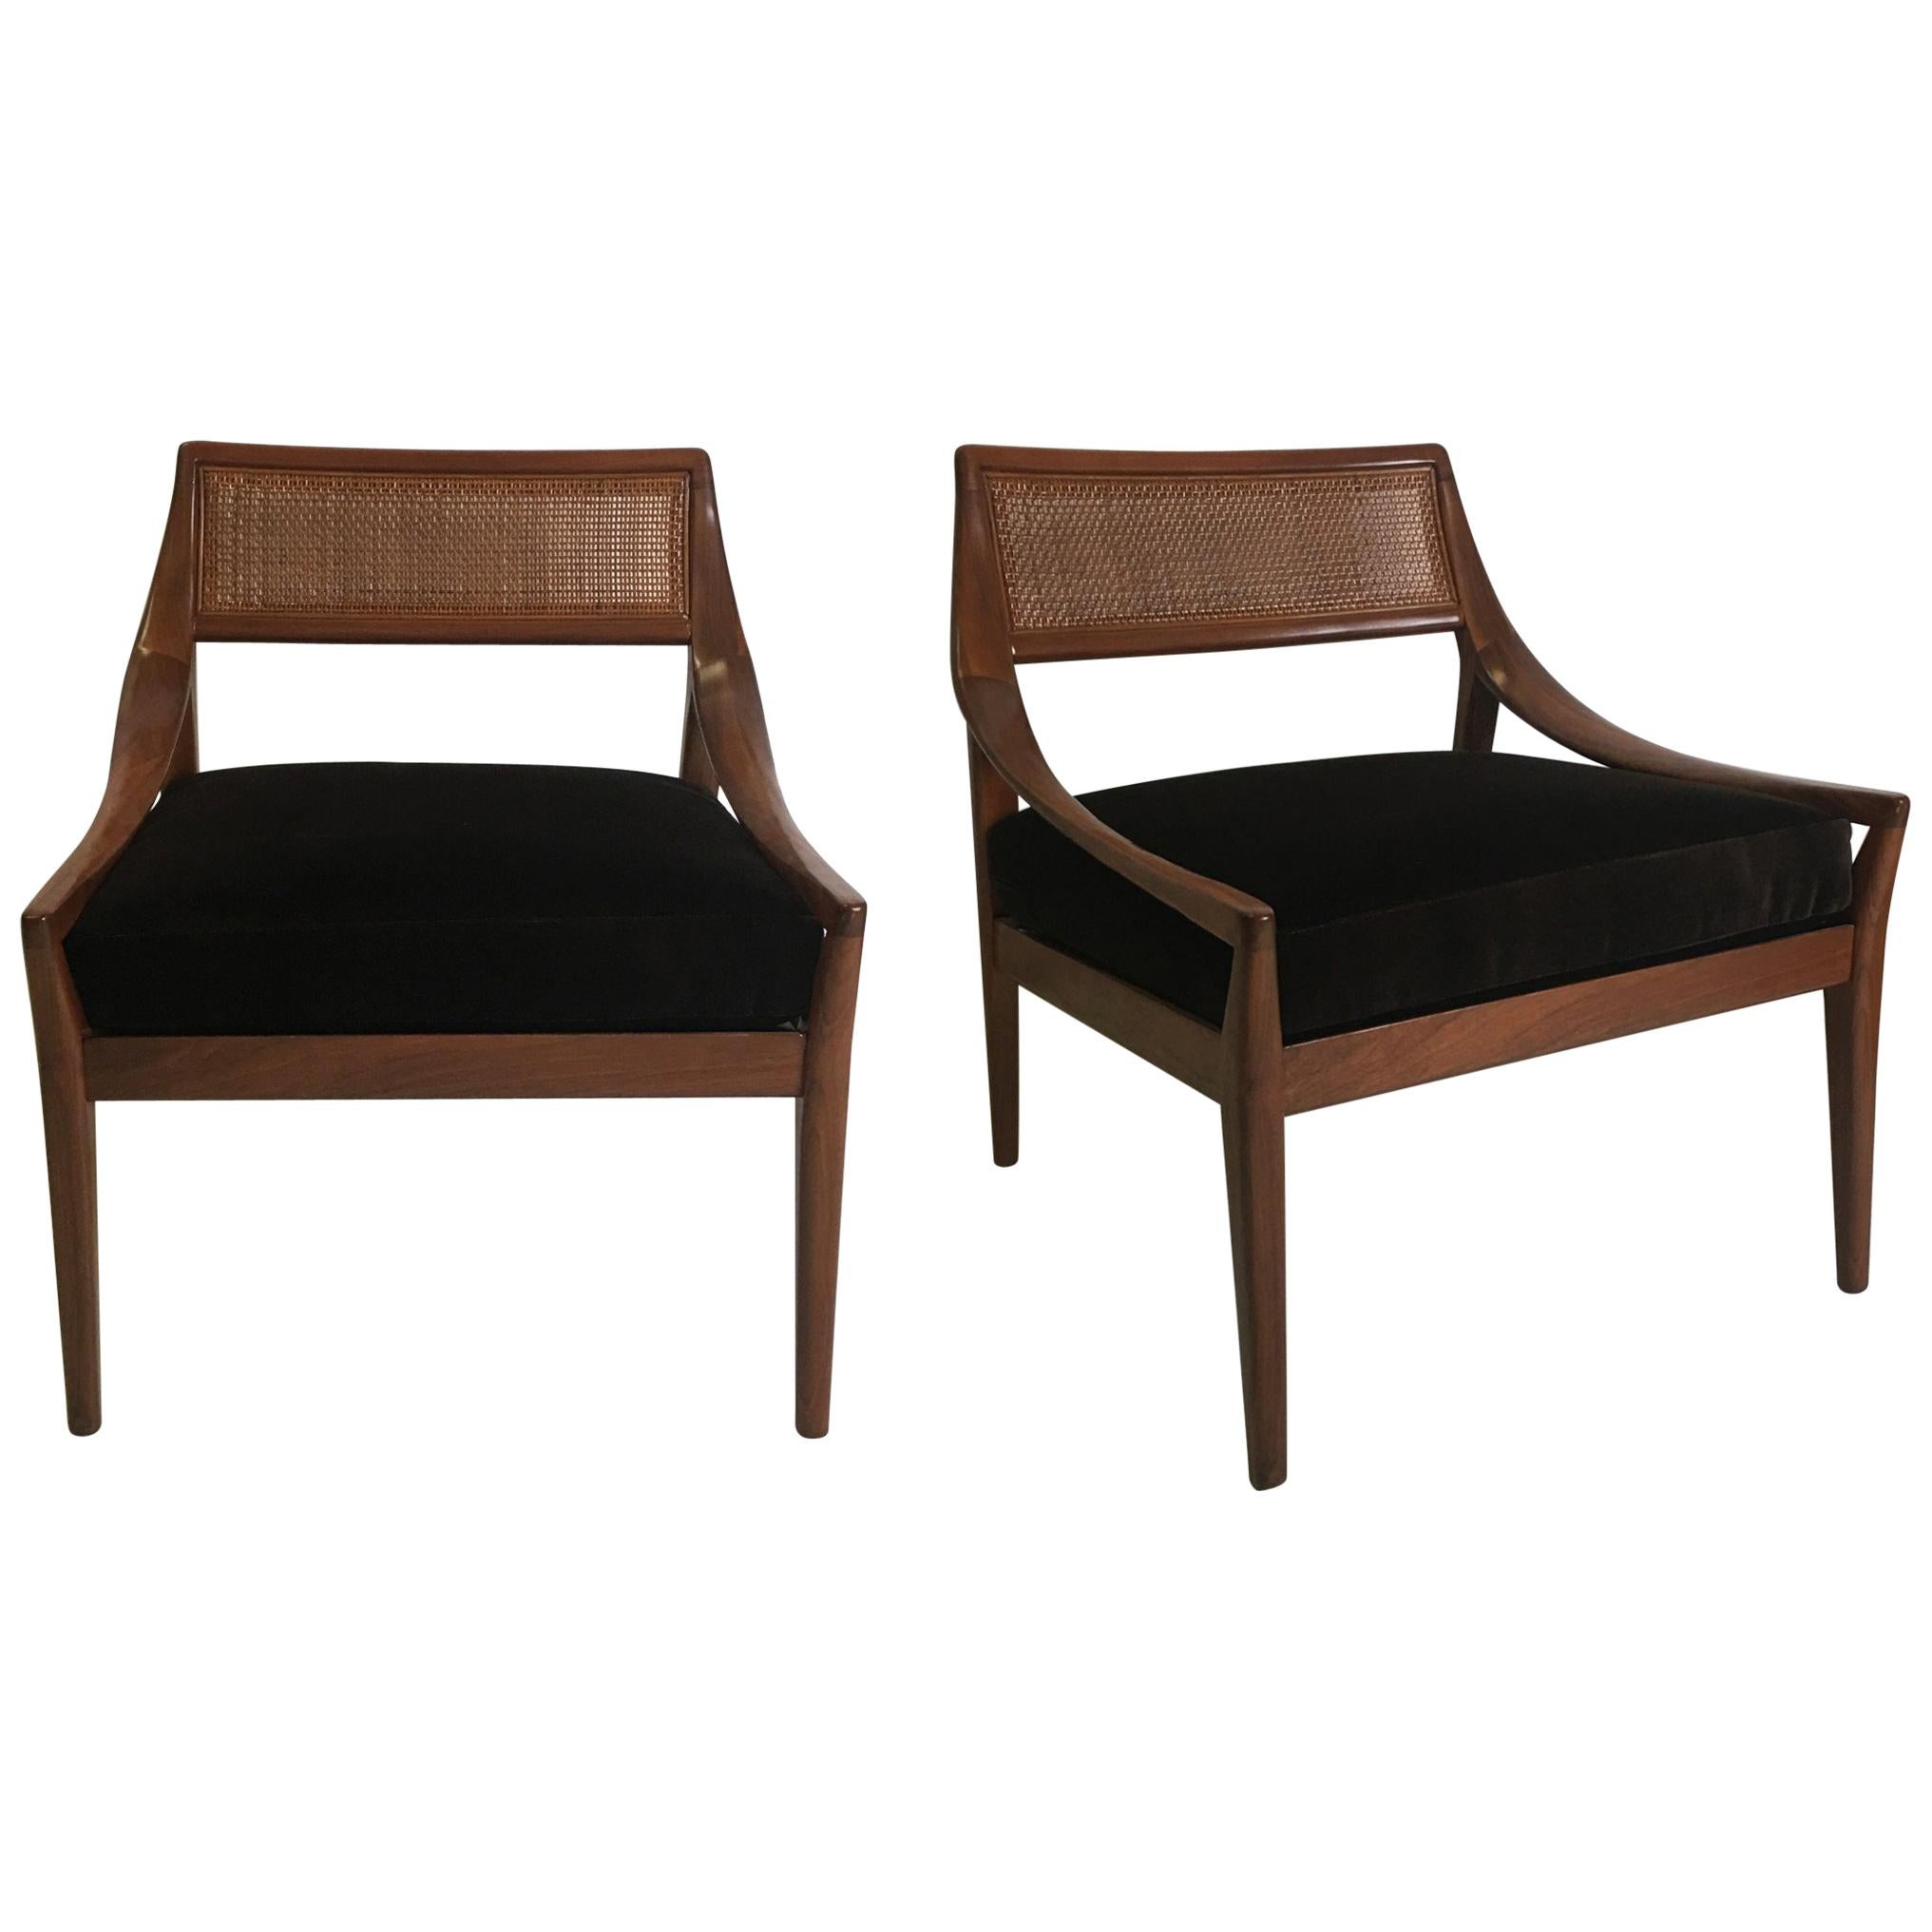 Pair of Walnut Armchairs by Kipp Stewart for Directional